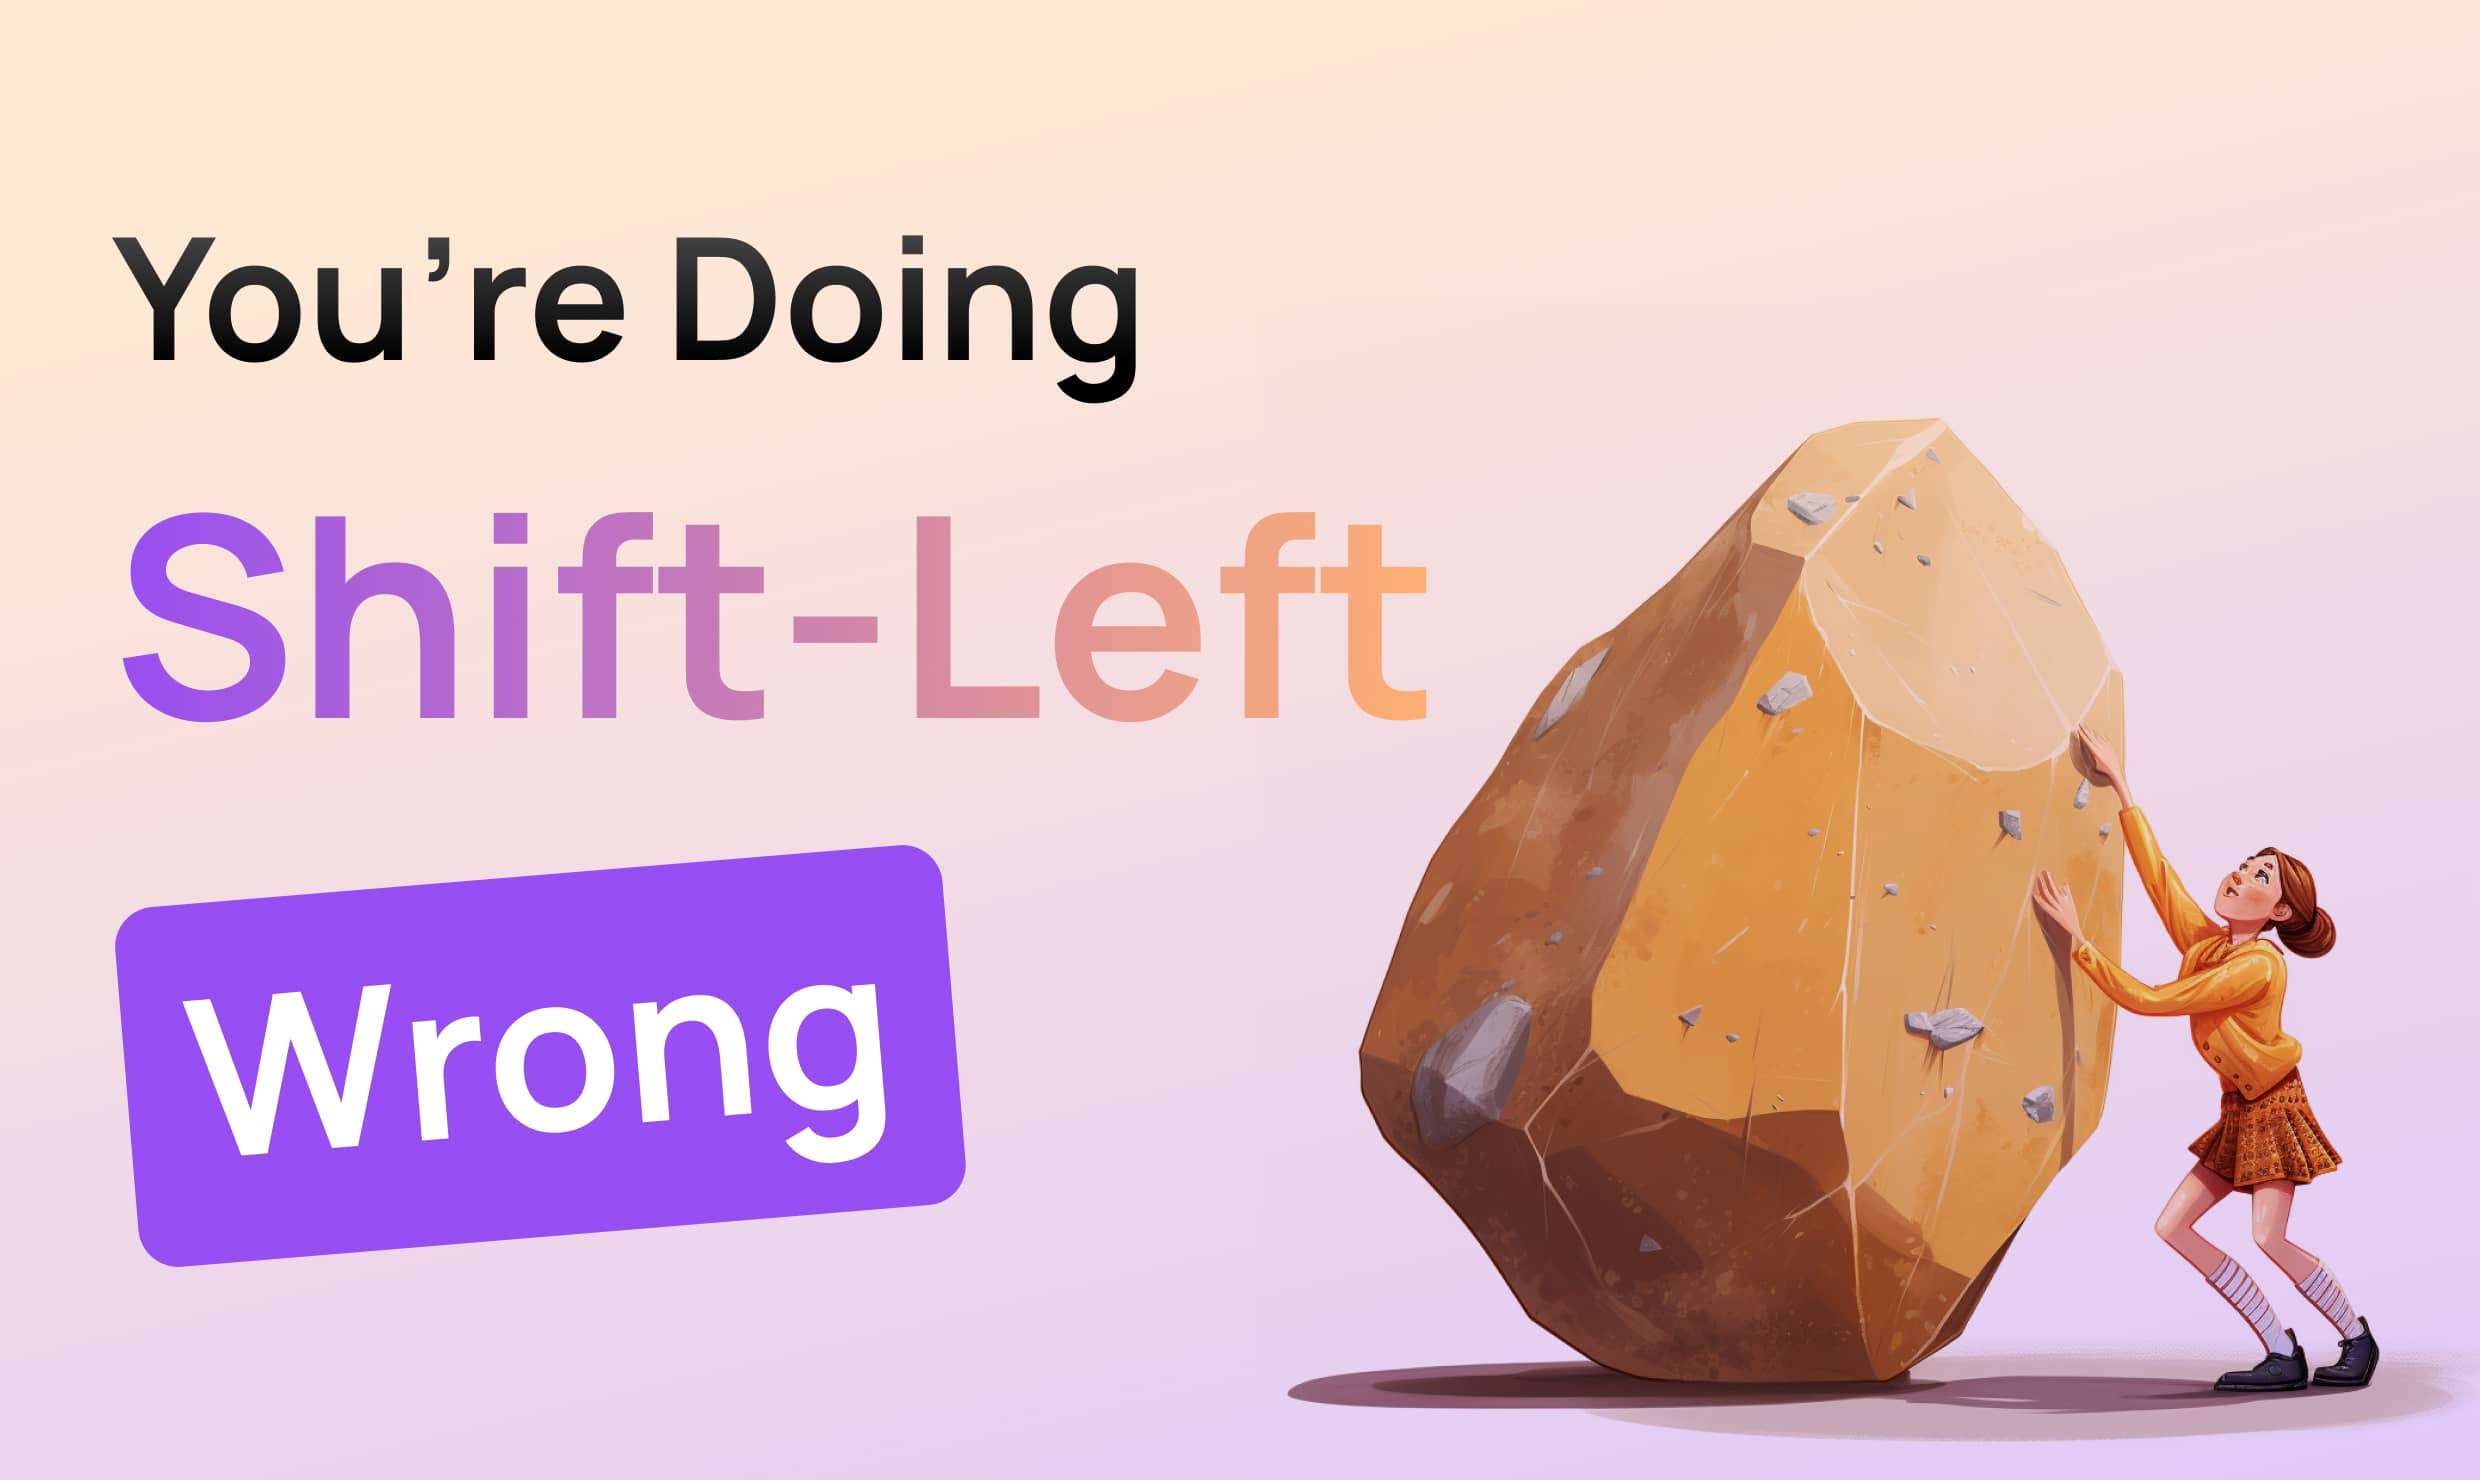 You're Doing Shift-Left Wrong